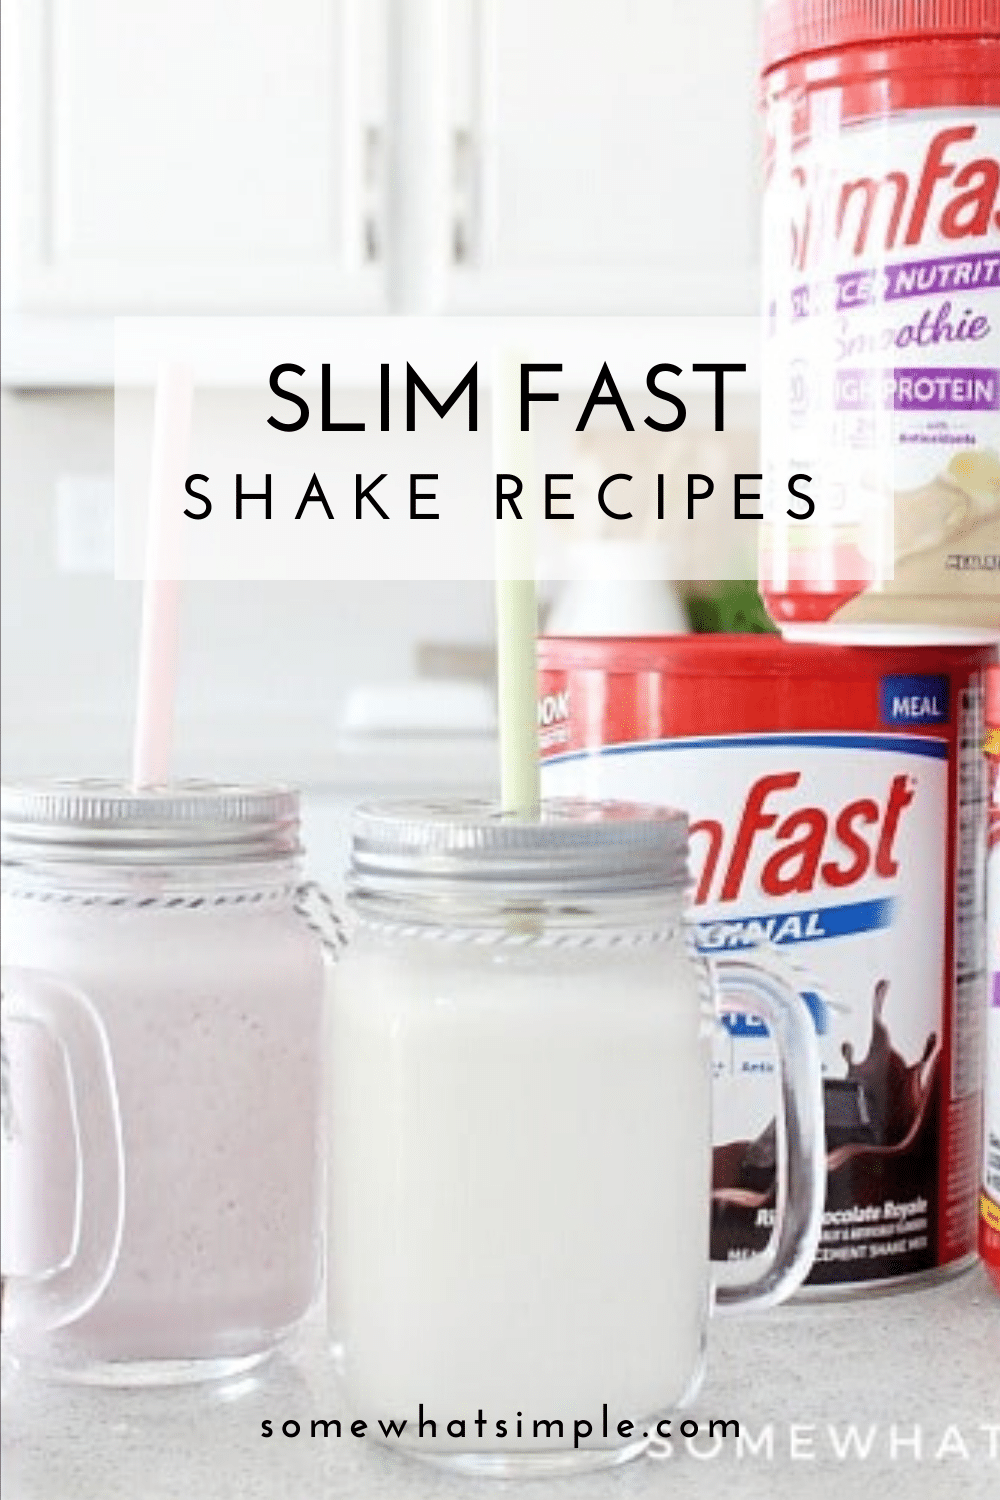 Slim Fast Shakes and smoothies are the best way to start your morning. This delicious recipe will make this healthy and convenient breakfast even better! These are ready in just minutes, so your morning routine is about to get a whole lot better! via @somewhatsimple